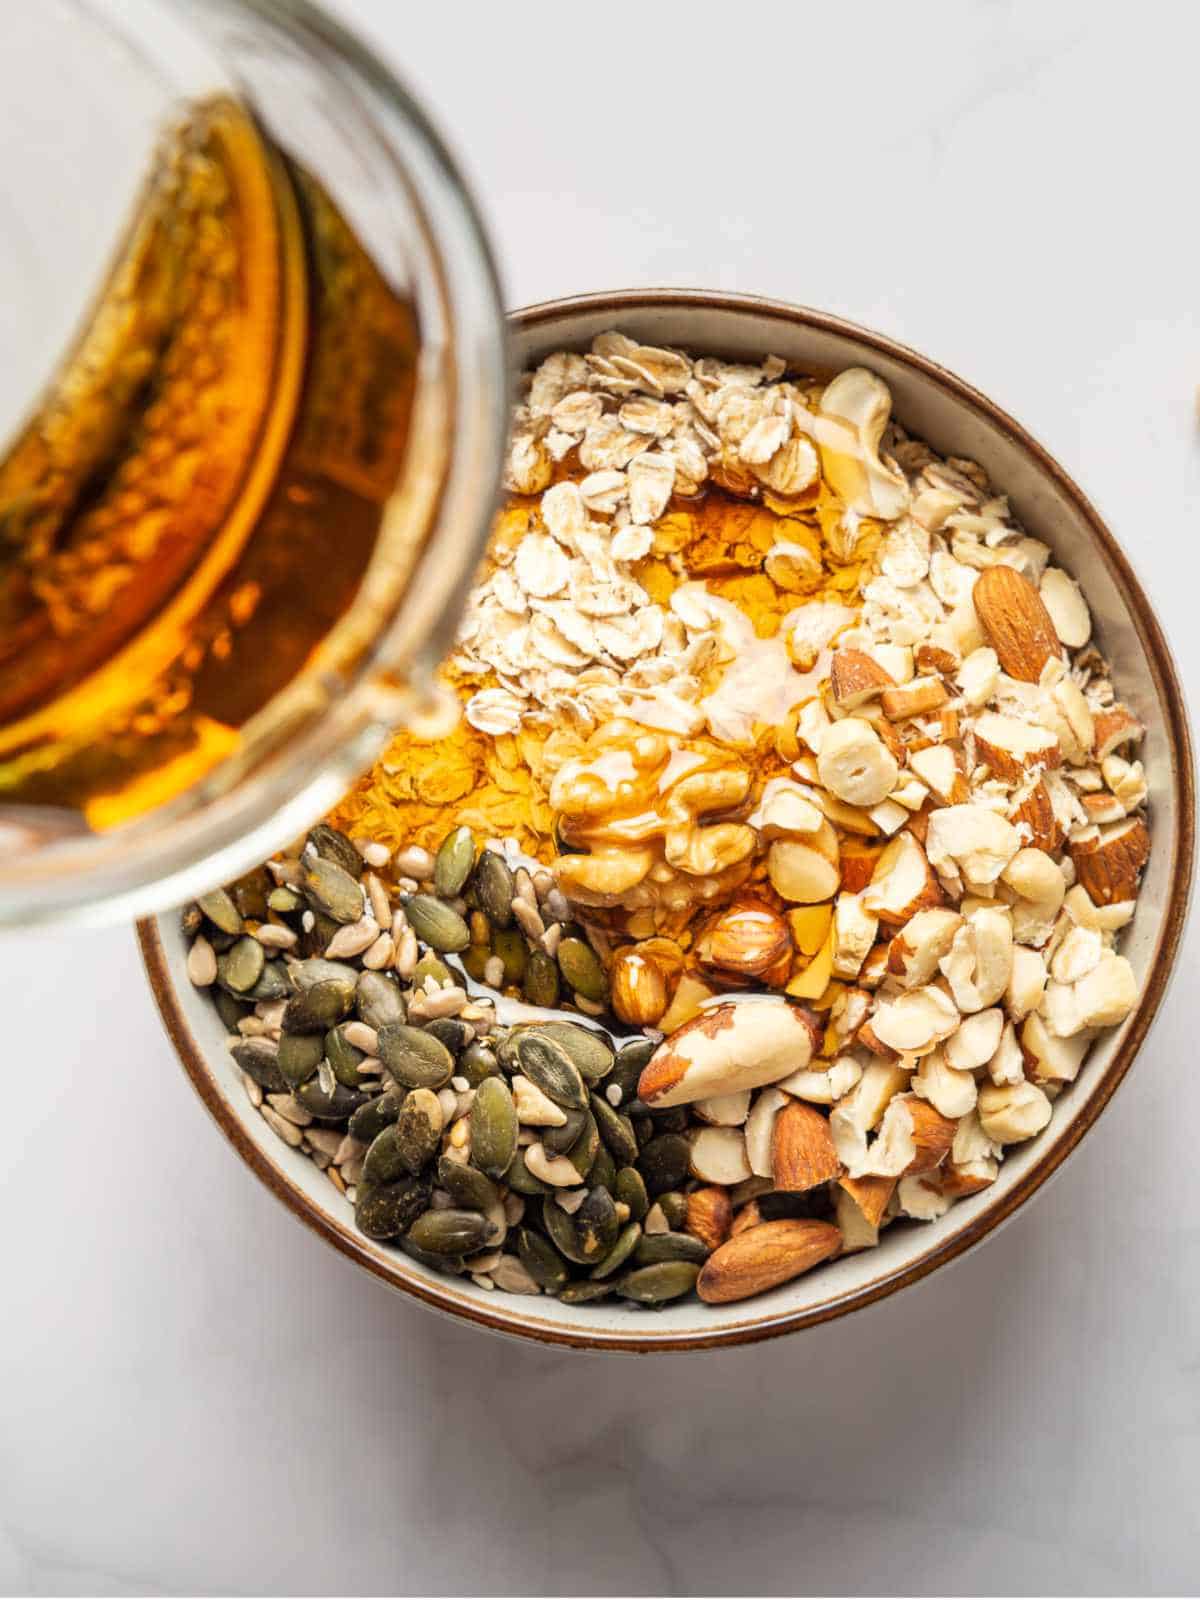 honey poured over a bowl of nuts, dried fruits, seeds, and rolled oats.